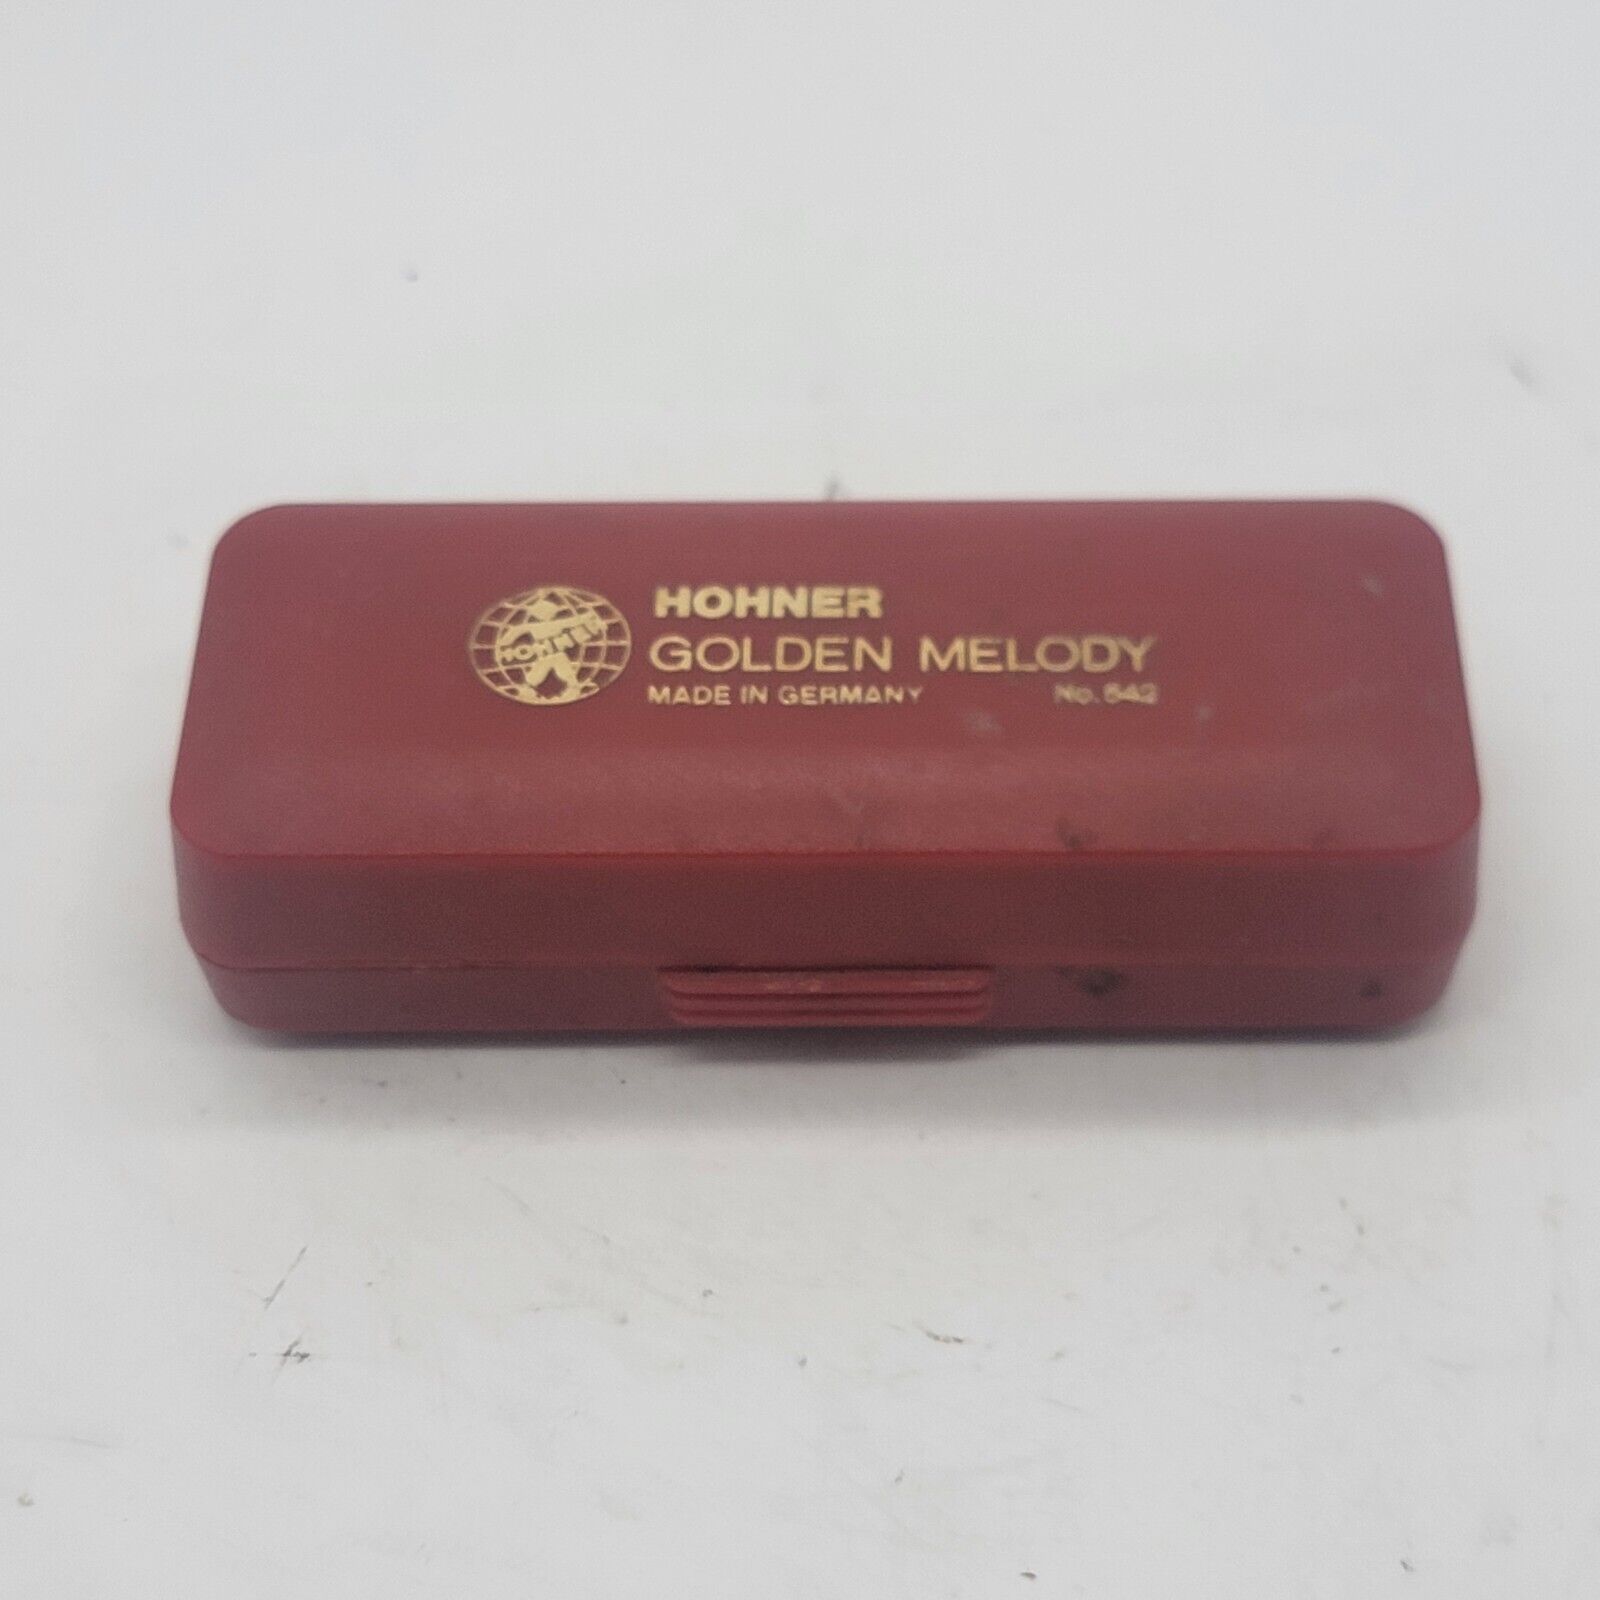  Hohner Golden Melody Harmonica D Key W/ Case 542/20D Hand Made In Germany